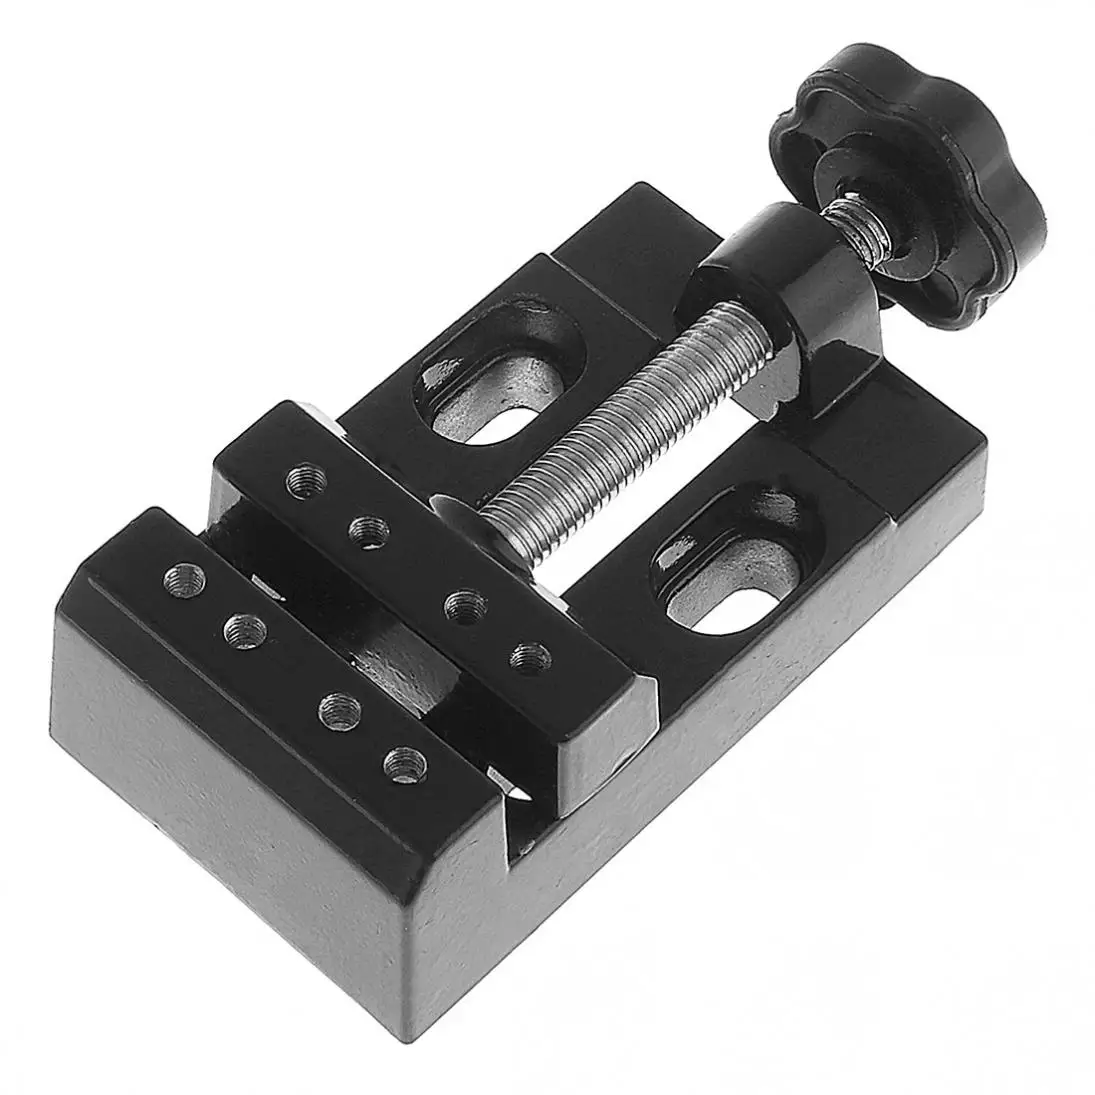 New DIY Sculpture Craft Jaw Bench Clamp Press Vice Opening Parallel Table Vise for Jaw Bench Clamp Drill 2pcs vise jaws strong magnetic bench vice jaw pad covers multi purpose protector for holding wood metal plastic tubing woodwork